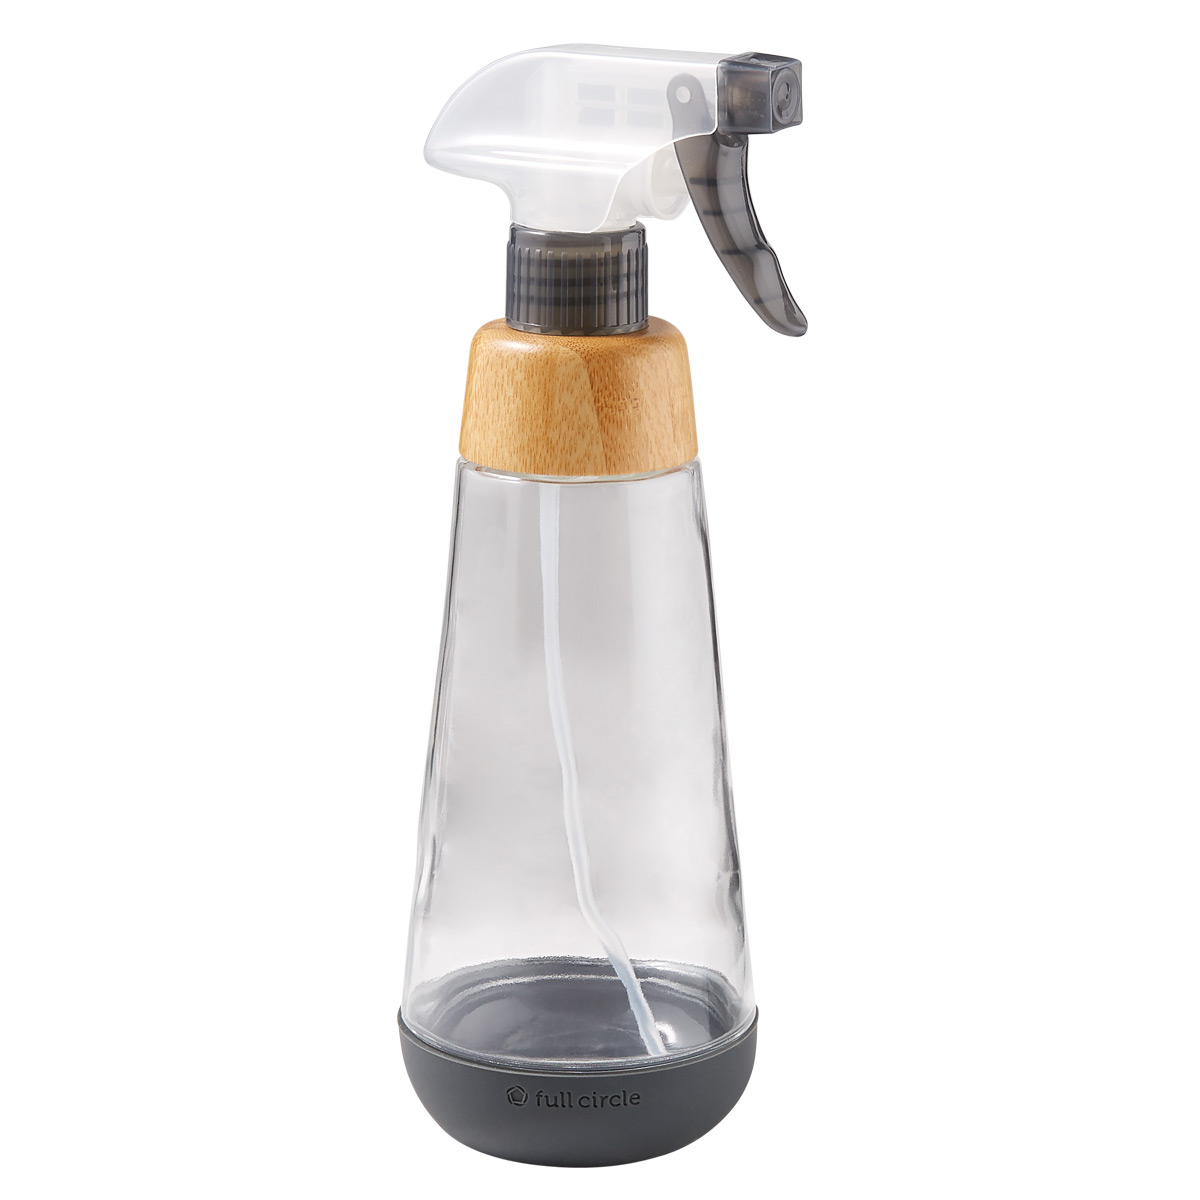 https://www.containerstore.com/catalogimages/382670/10079499-16oz-glass-spray-bottle-cle.jpg